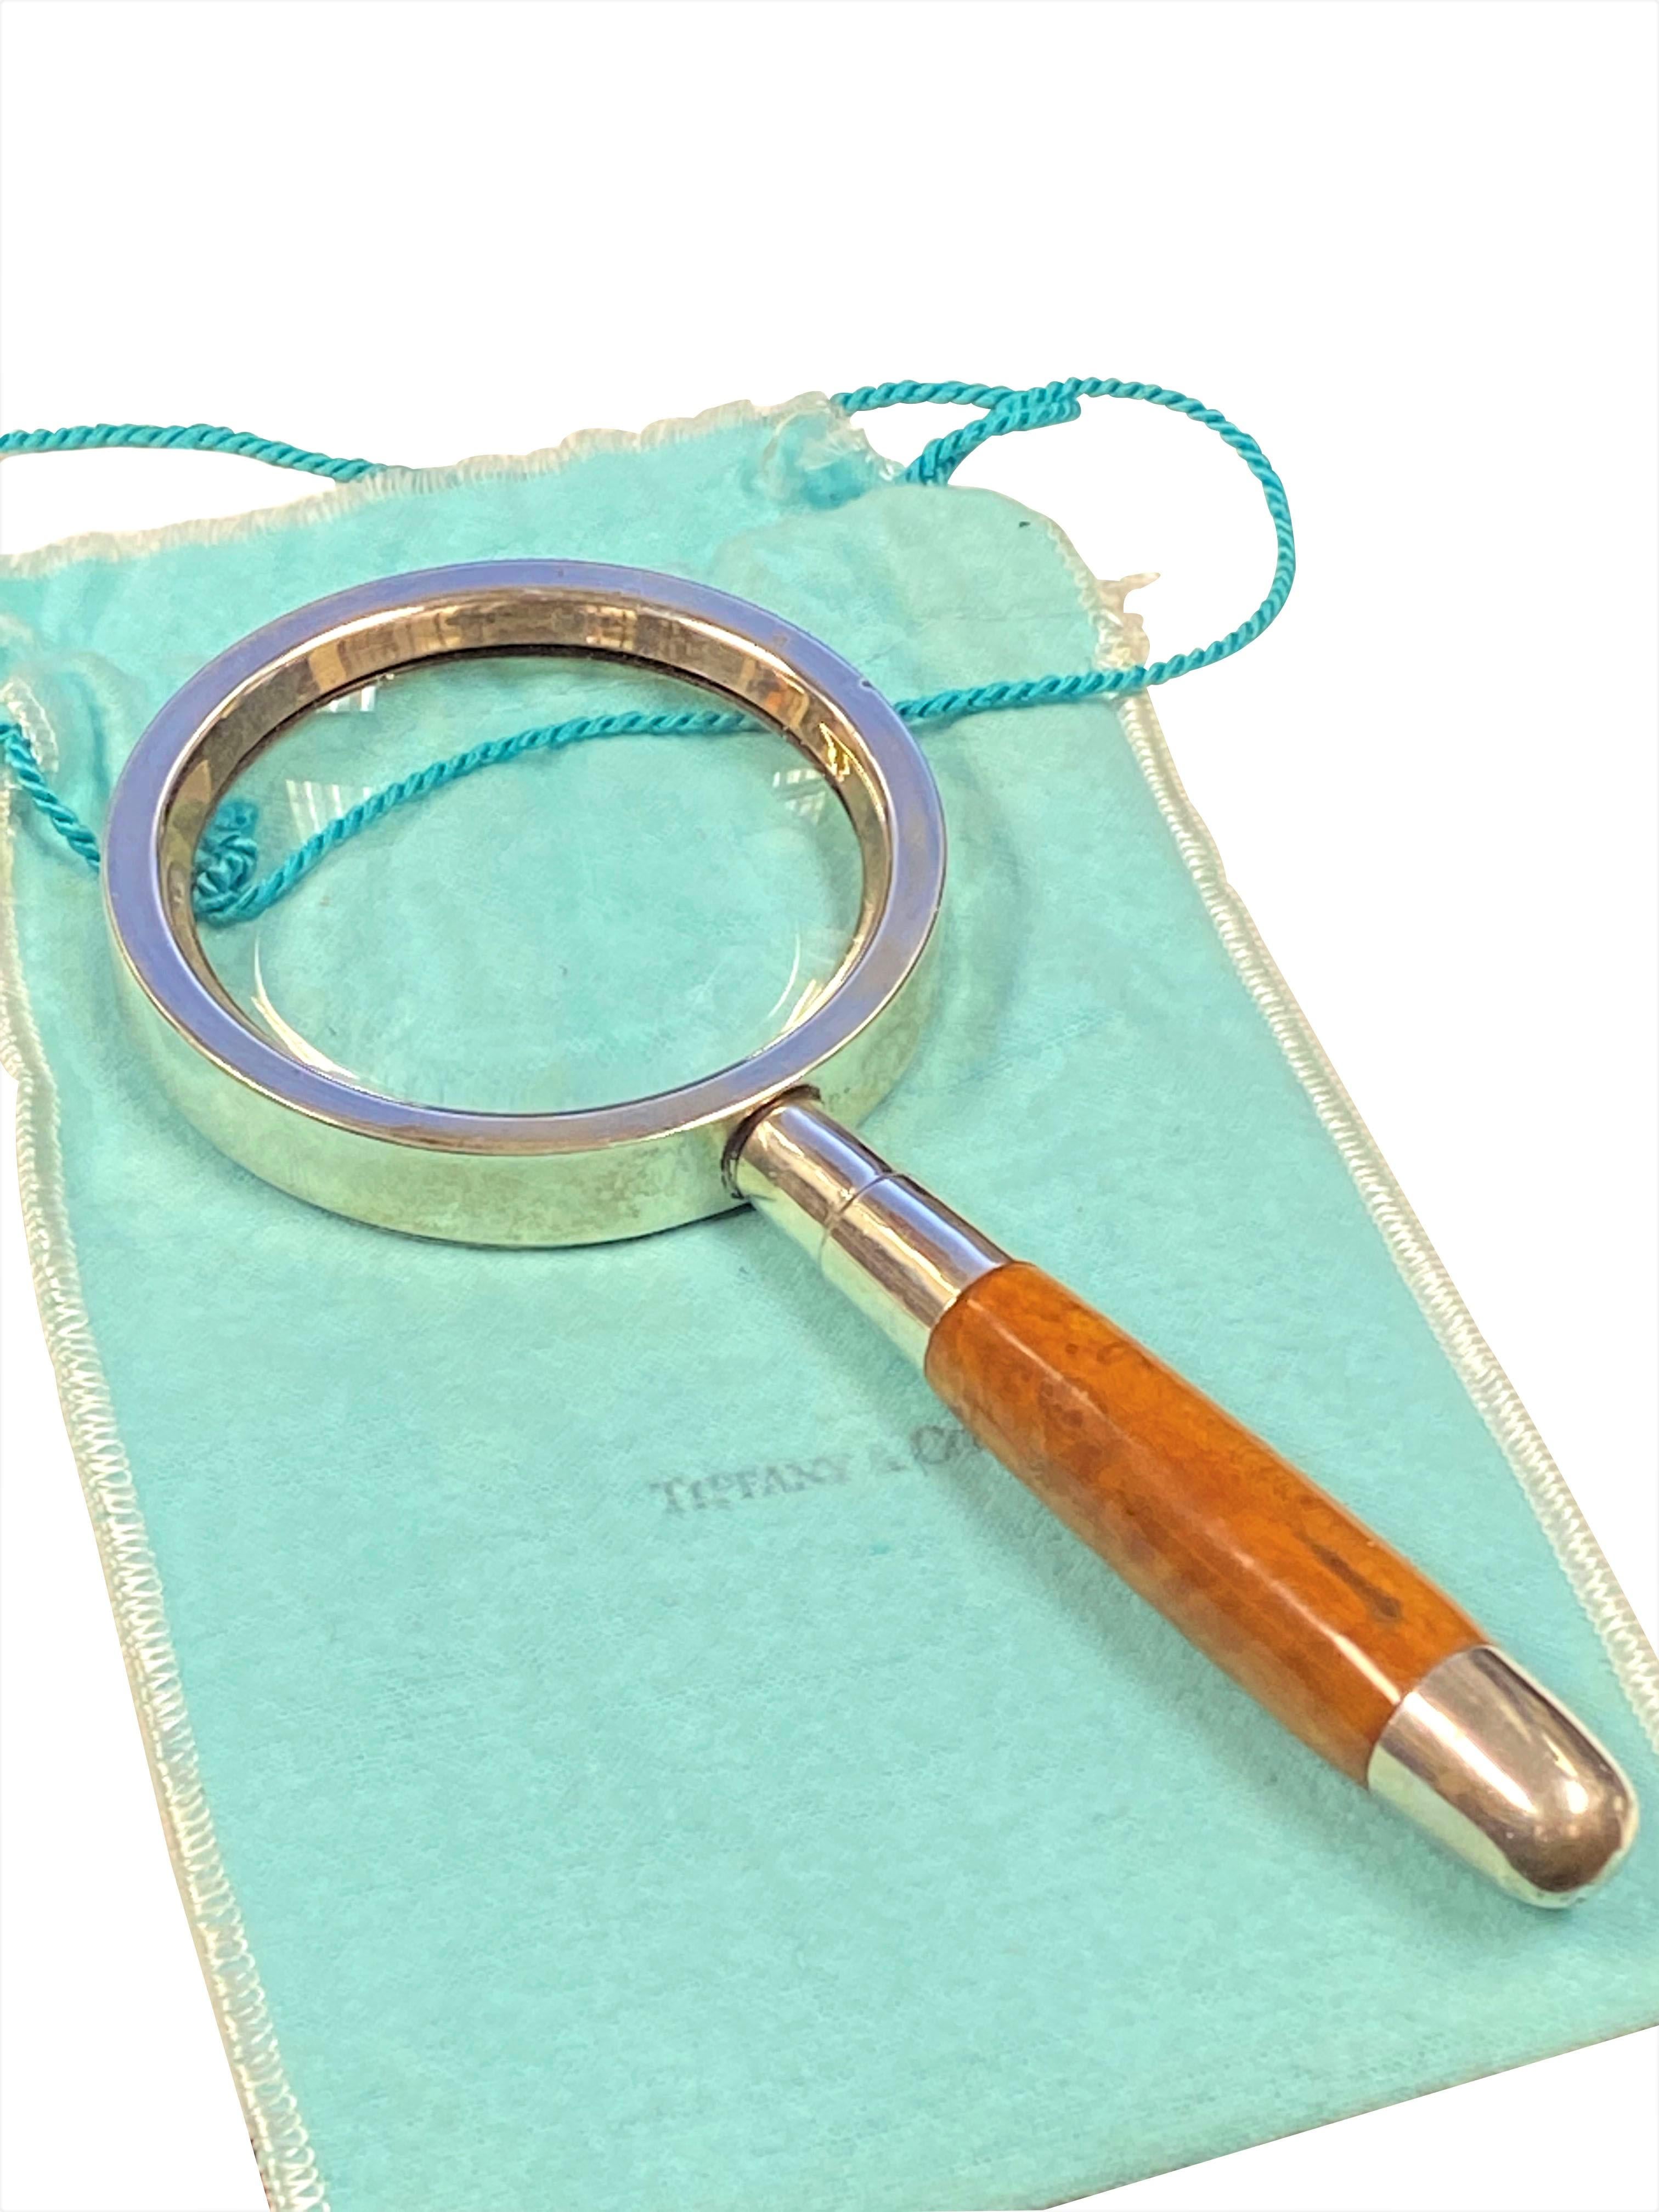 Circa 1980 Tiffany & Company Magnifying Glass, A sterling silver capped Wood Handle and a Sterling Frame around the Glass, measuring 7 1/2 inches in length. In original Tiffany dust pouch.